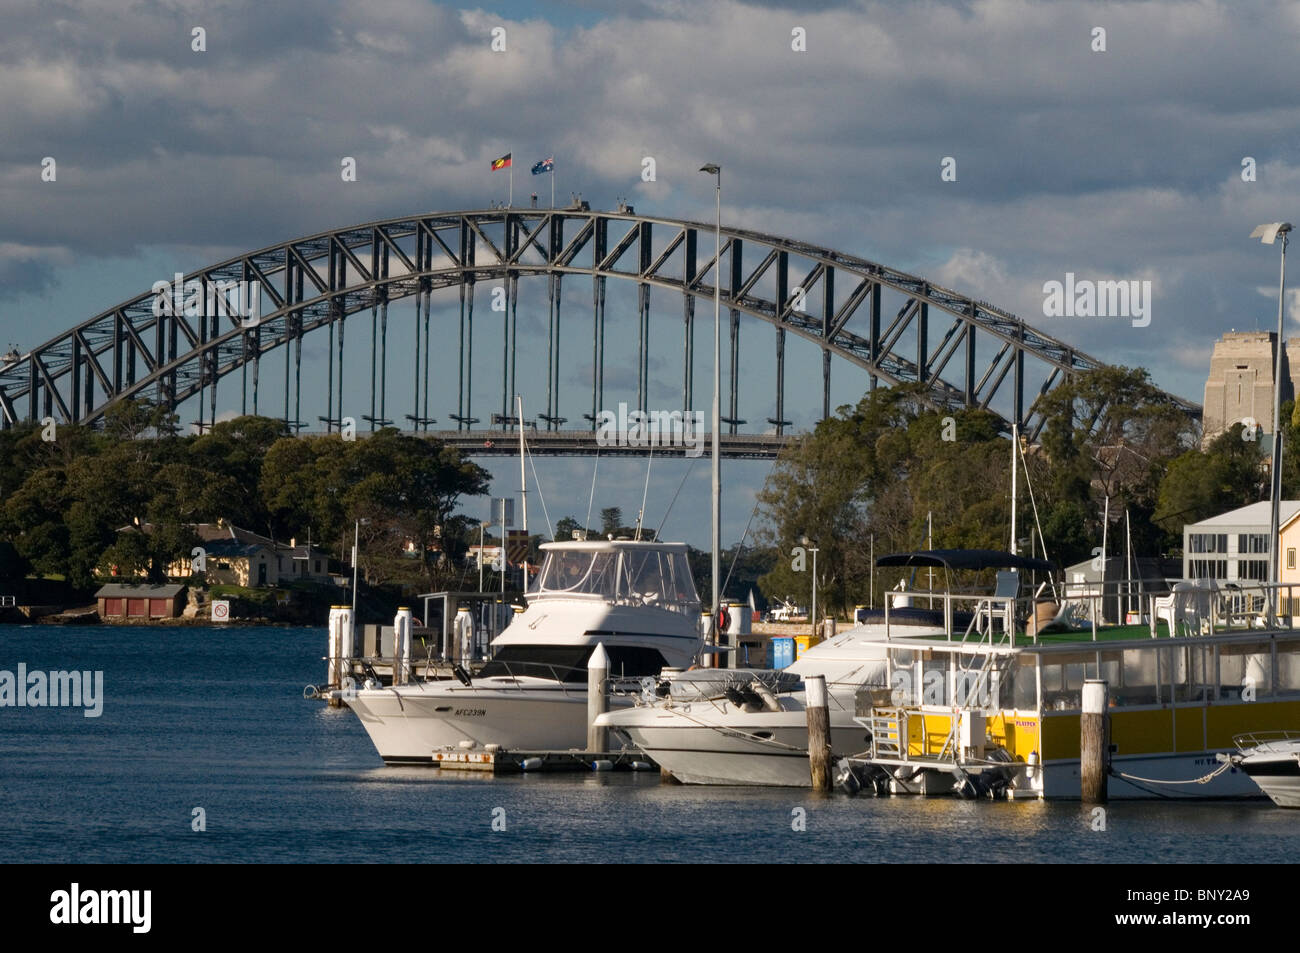 Balmain Sydney High Resolution Stock Photography and Images - Alamy